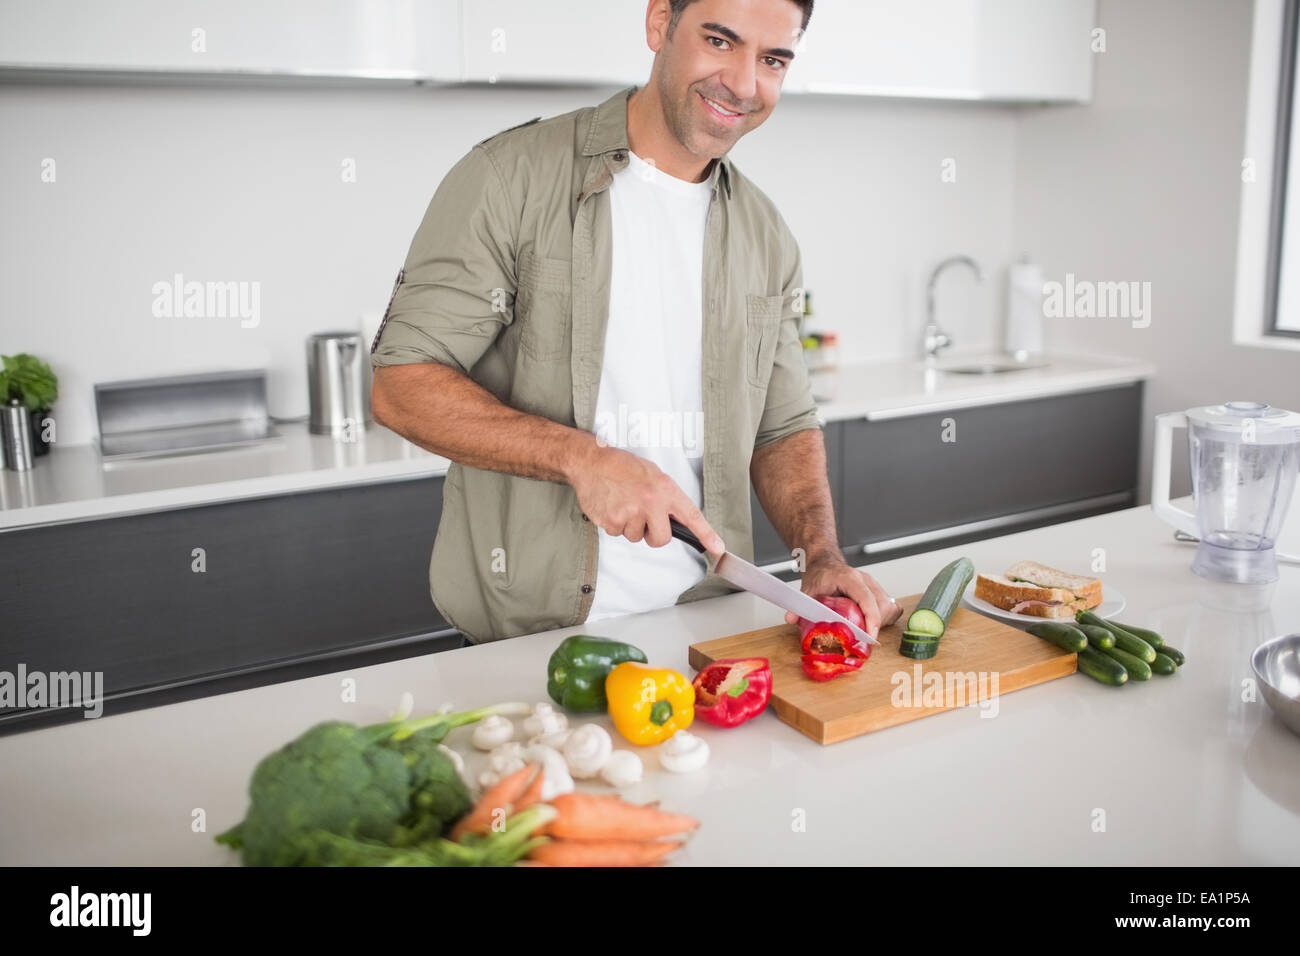 Smiling man chopping vegetables in kitchen Stock Photo - Alamy